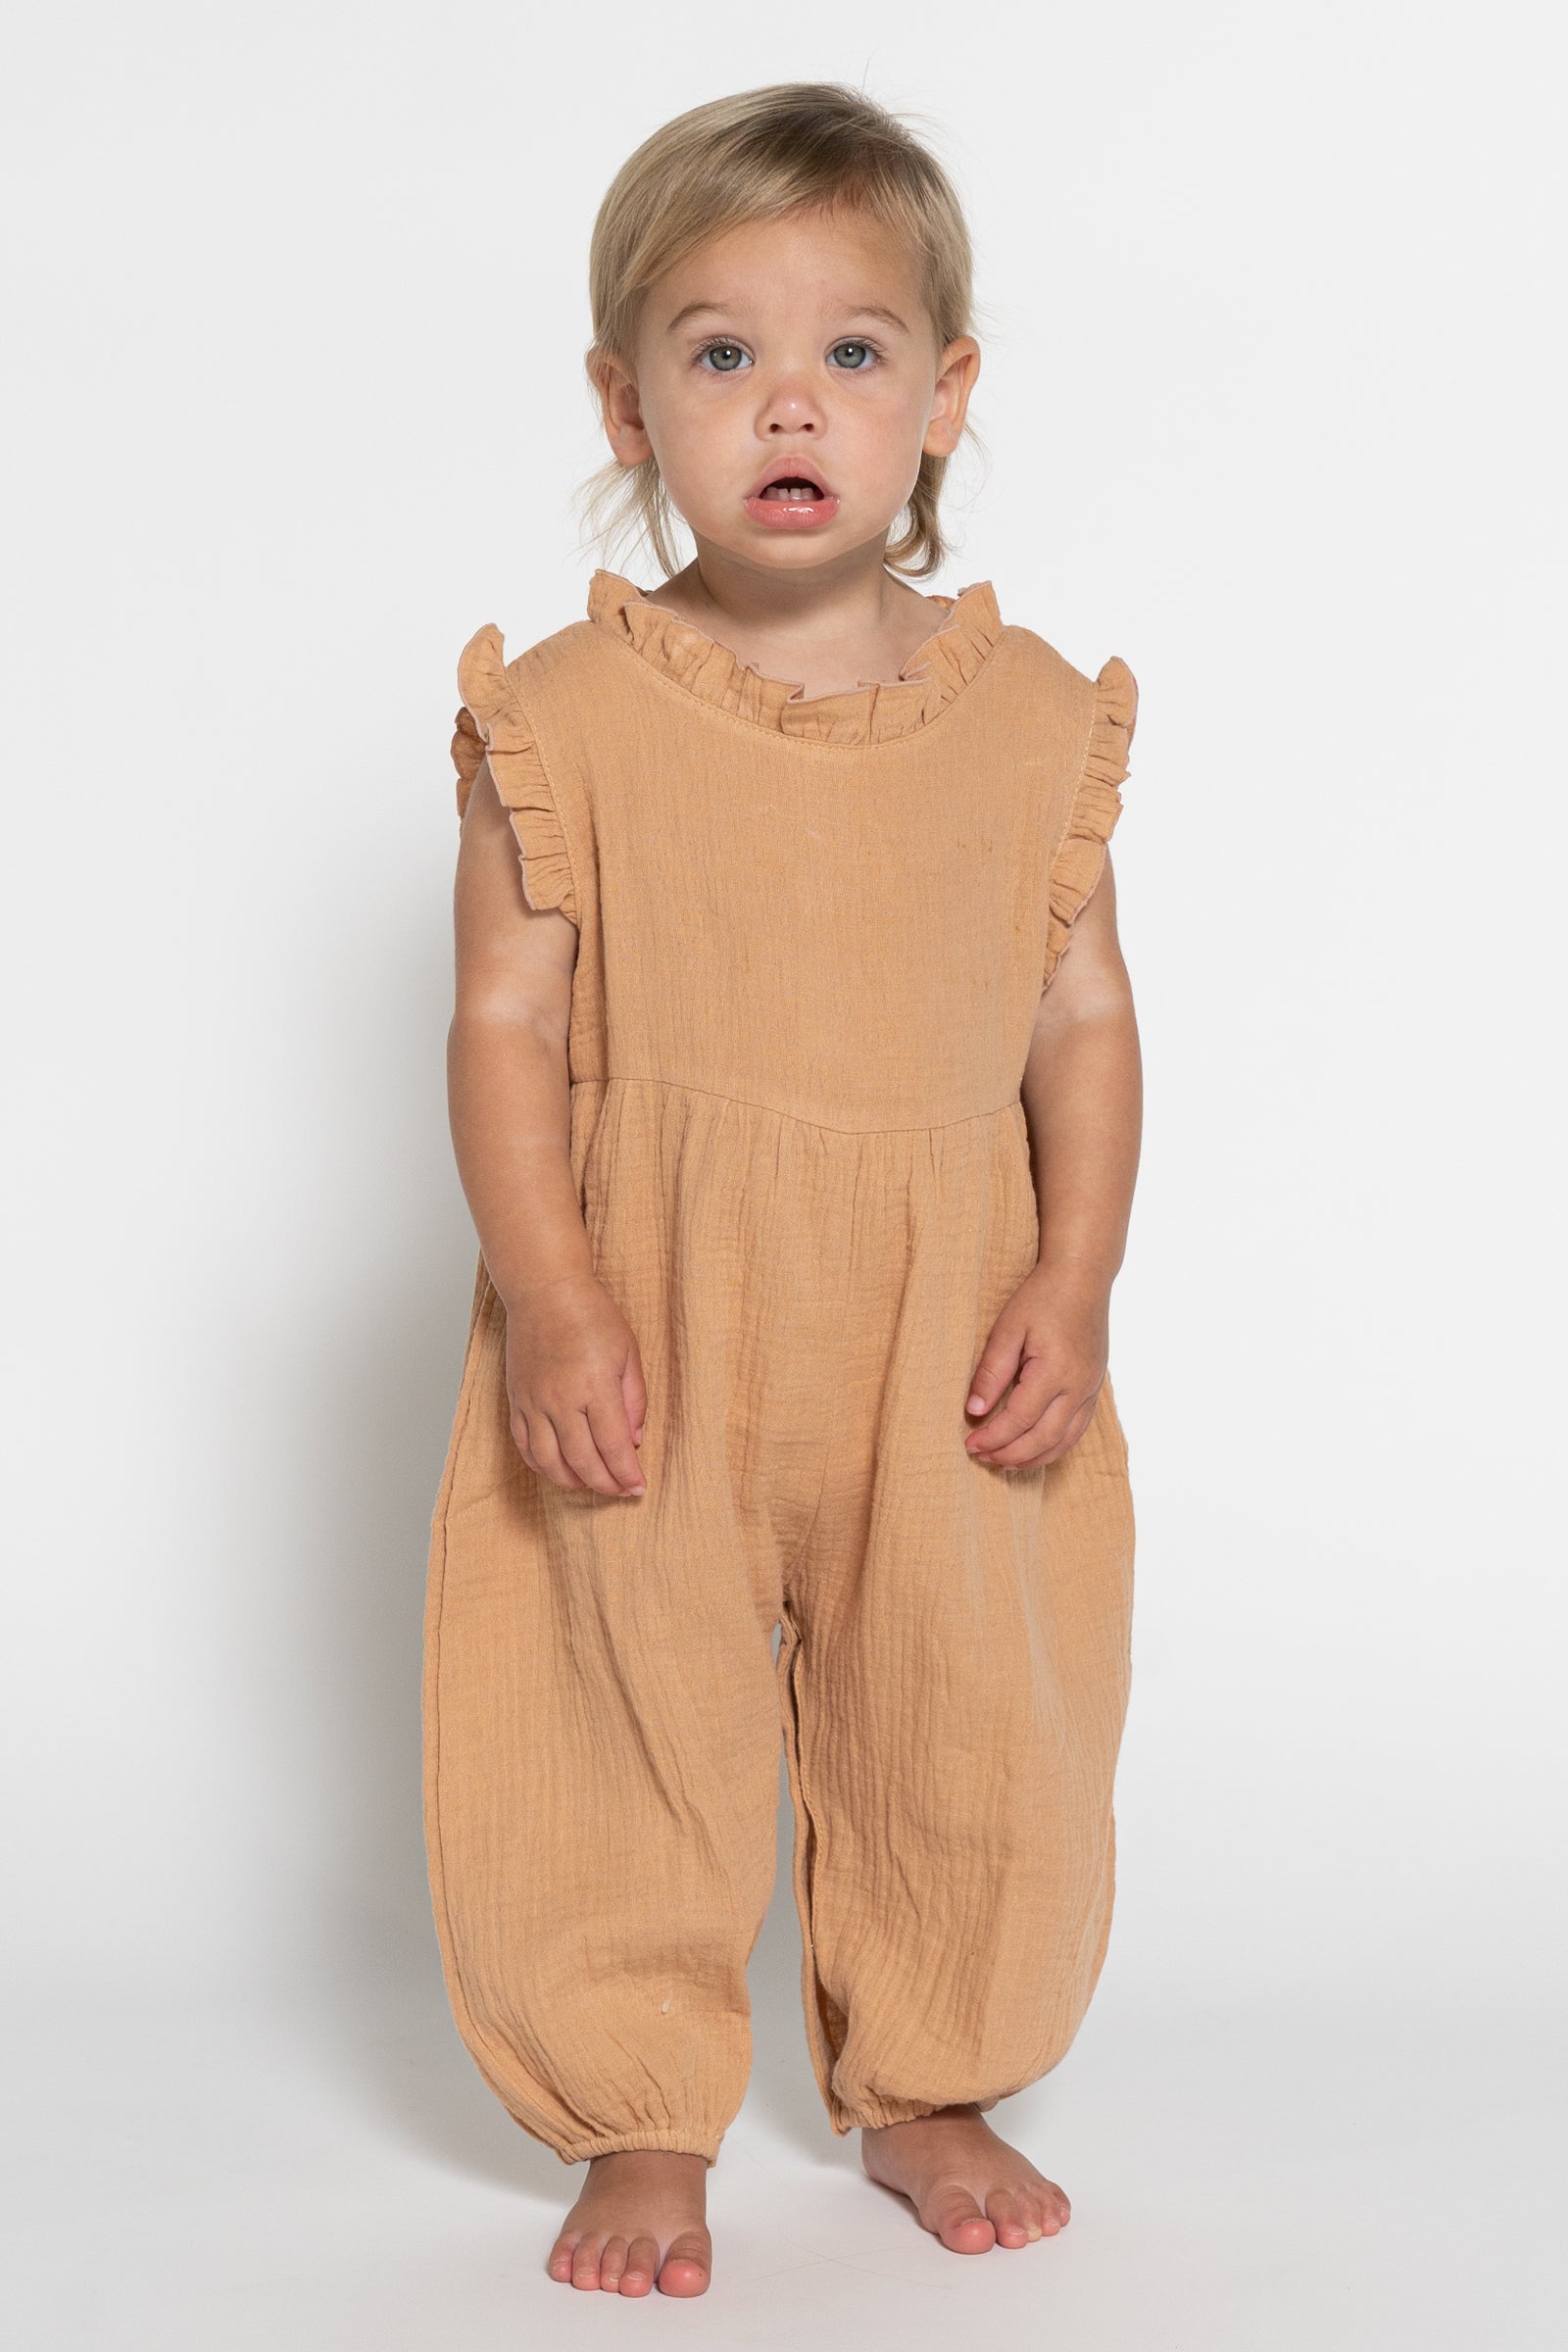 Alex & Ant - Frankie Playsuit - Brulle